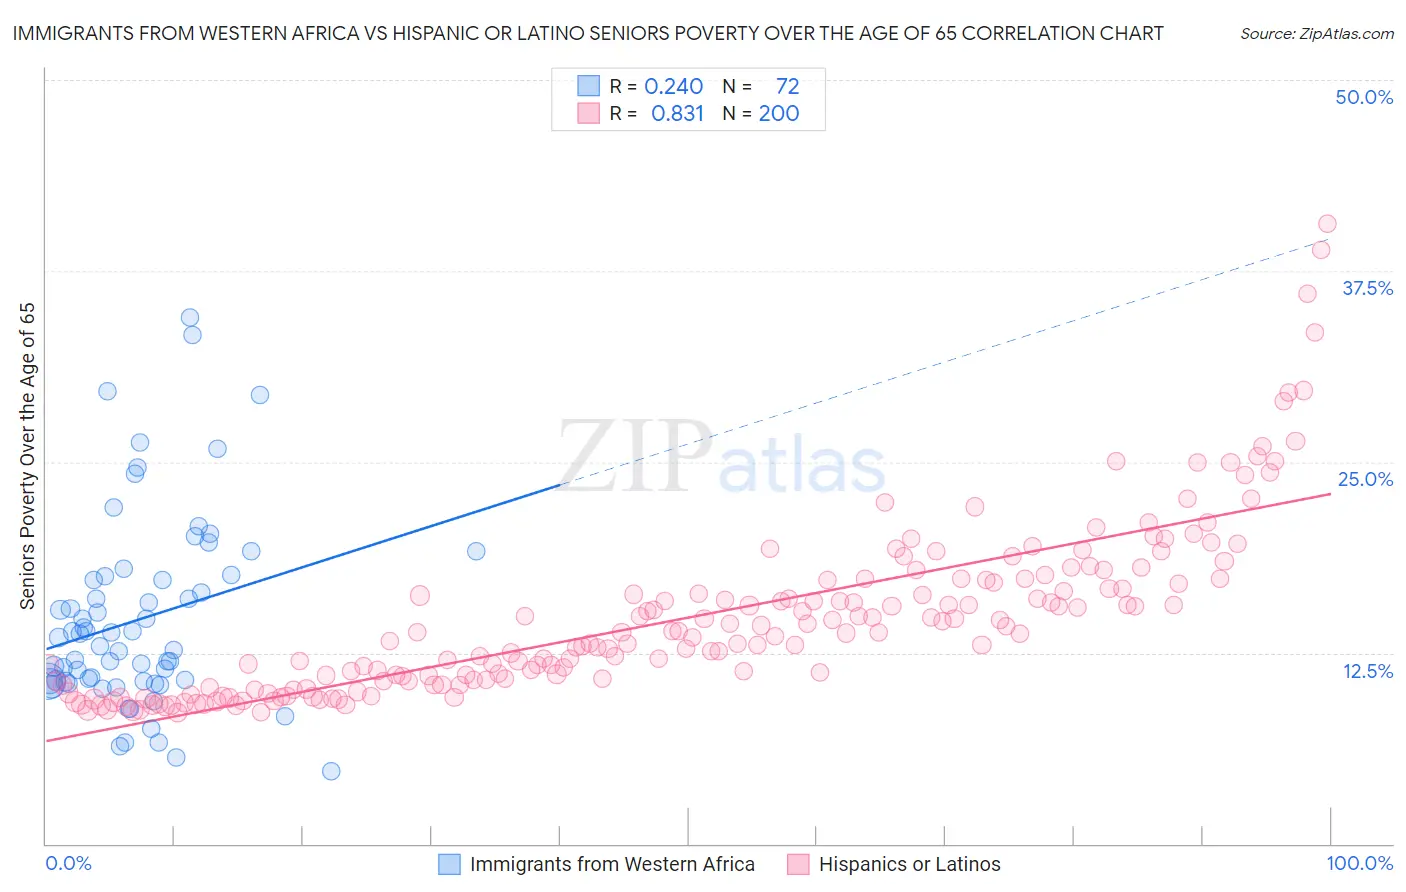 Immigrants from Western Africa vs Hispanic or Latino Seniors Poverty Over the Age of 65